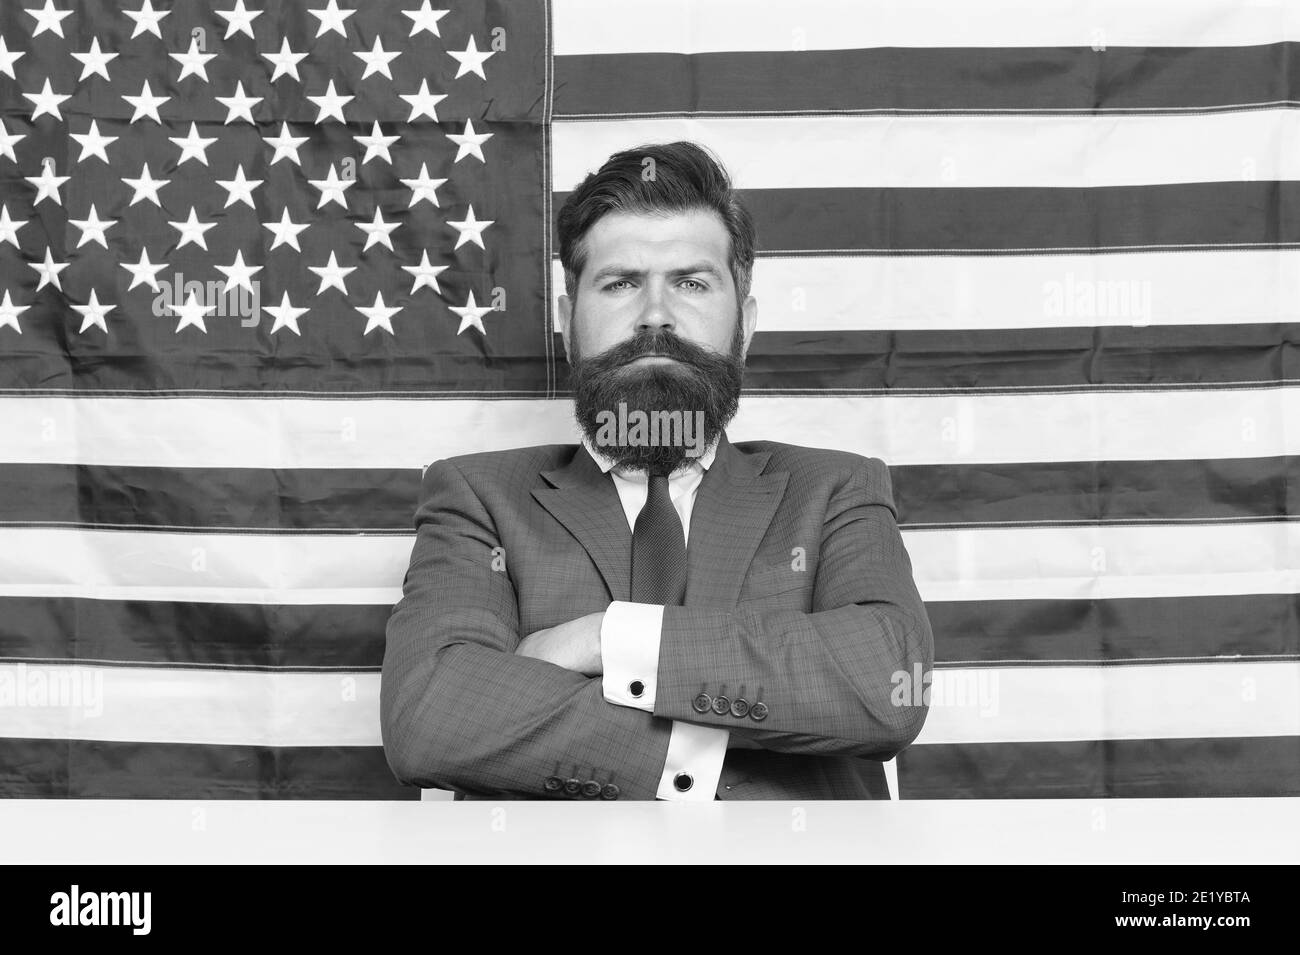 Confident in future of his country. Confident american keep arms crossed. Confident look of serious businessman. Independence day. July 4th. USA flag background. Proud and confident. Stock Photo